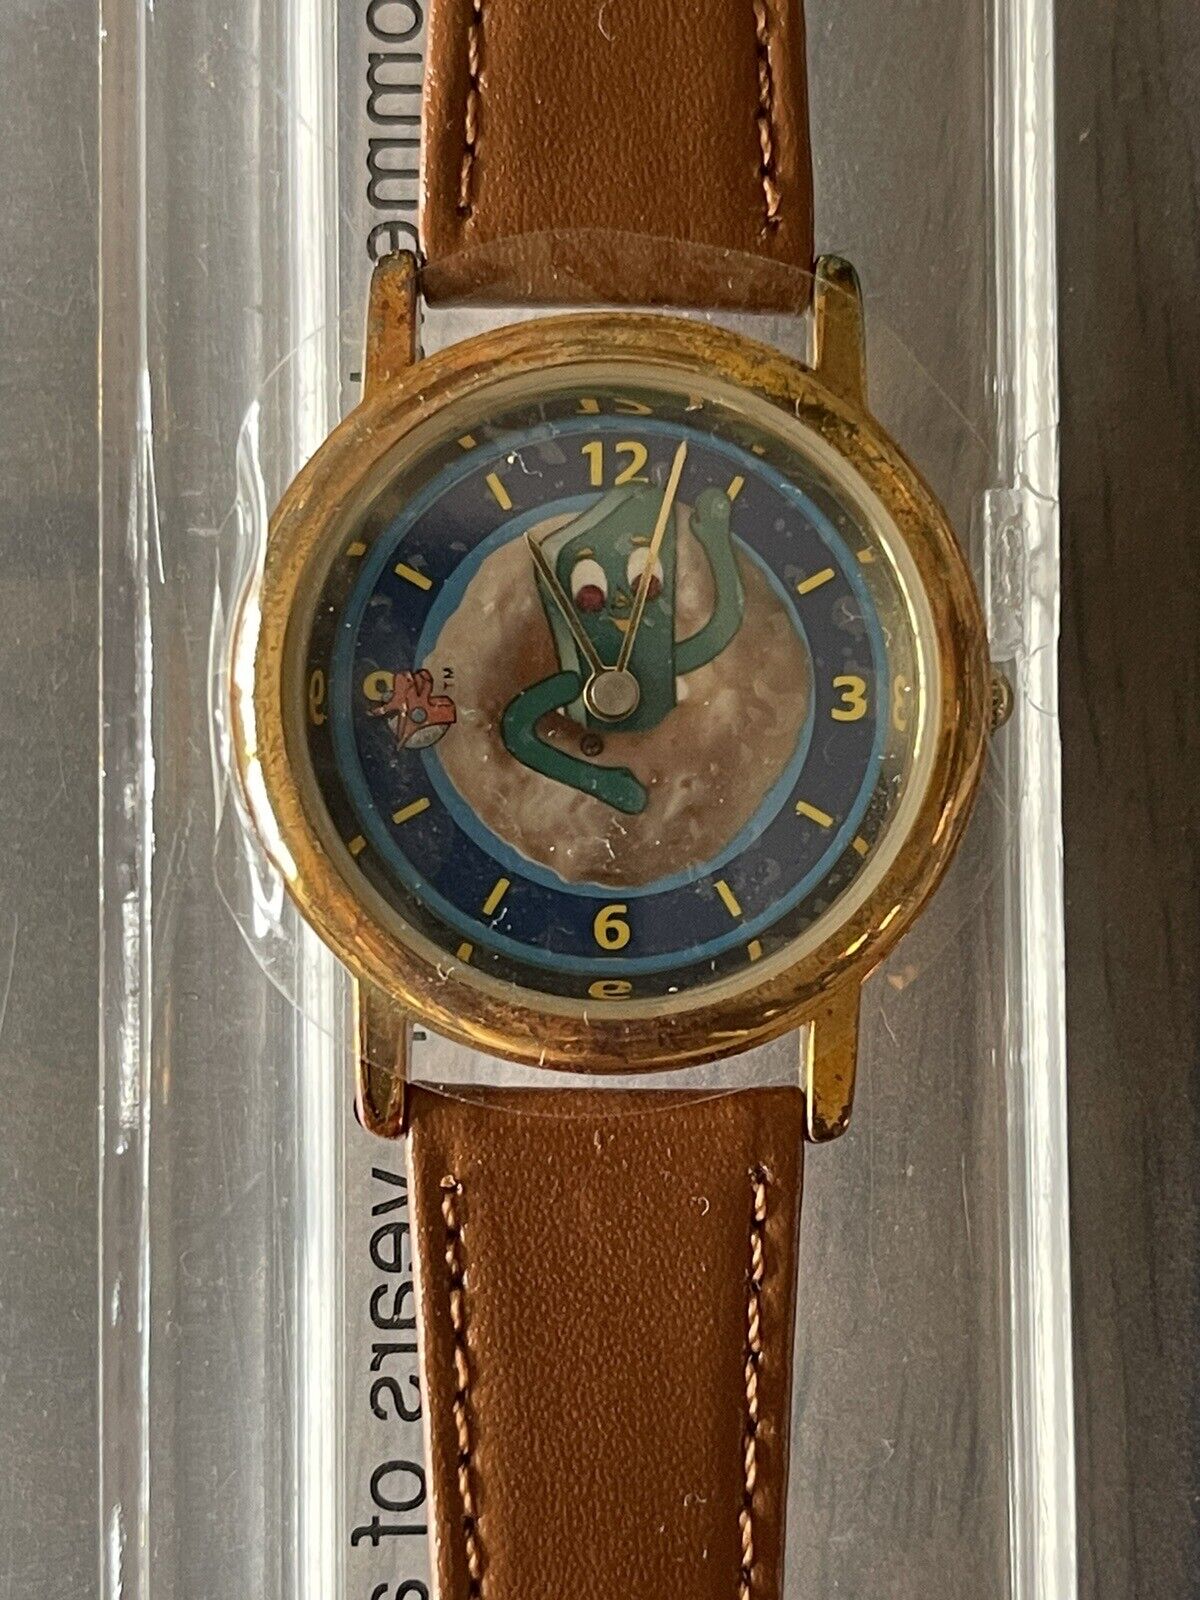 Rare Gumby & Pokey Watch New Old Stock Mint in Box - Leather Strap